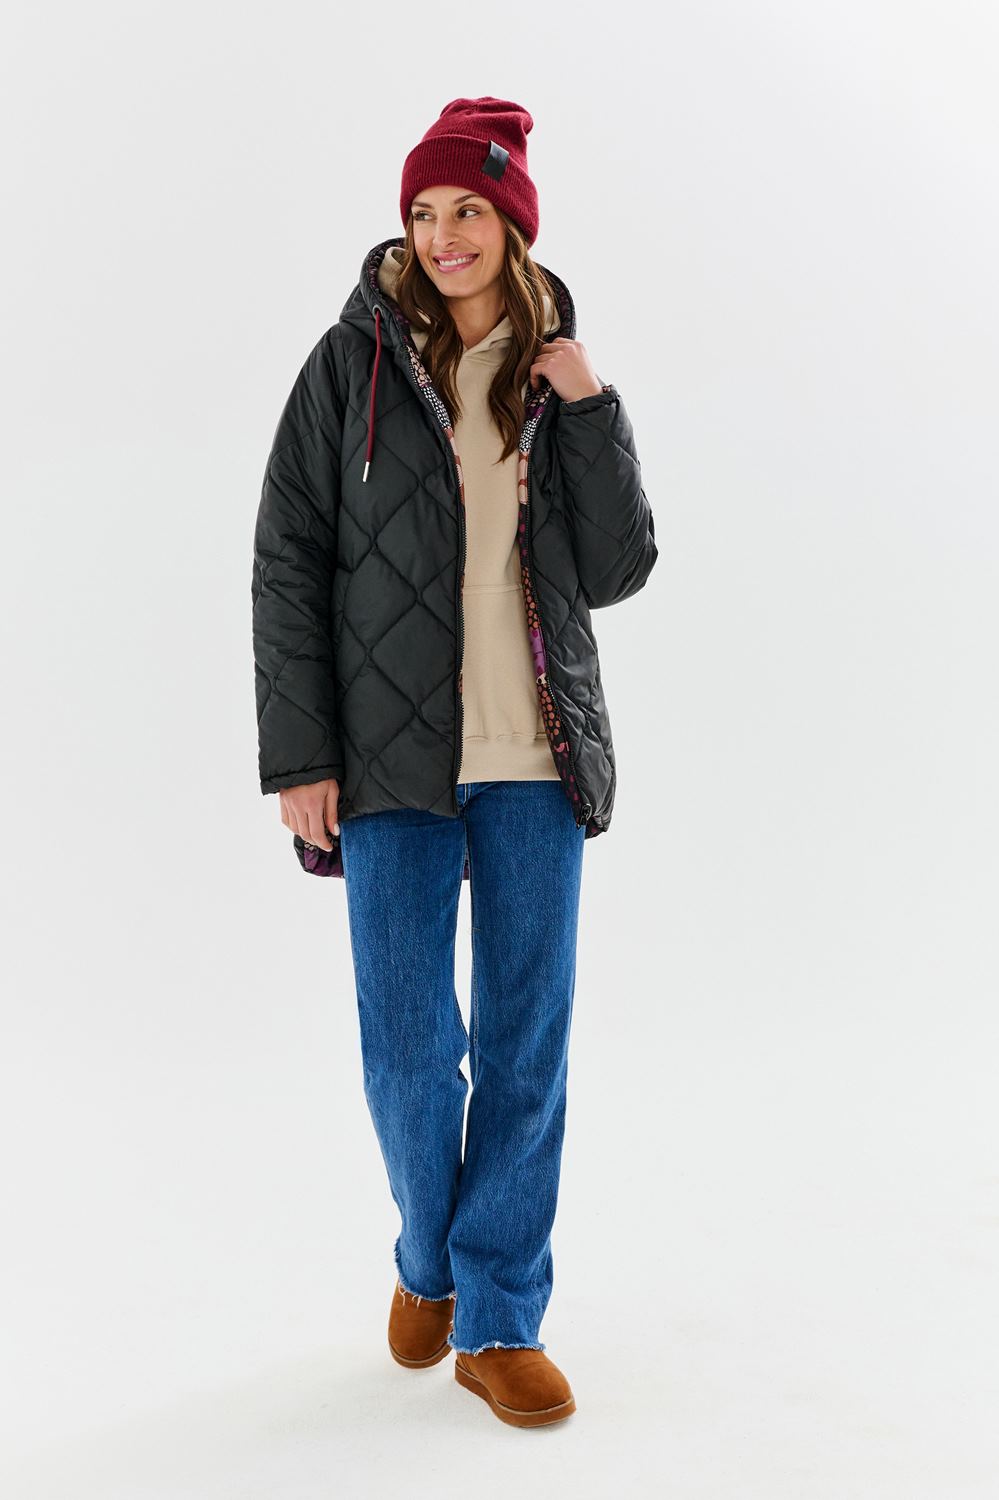 The Waterfall double-sided insulated jacket